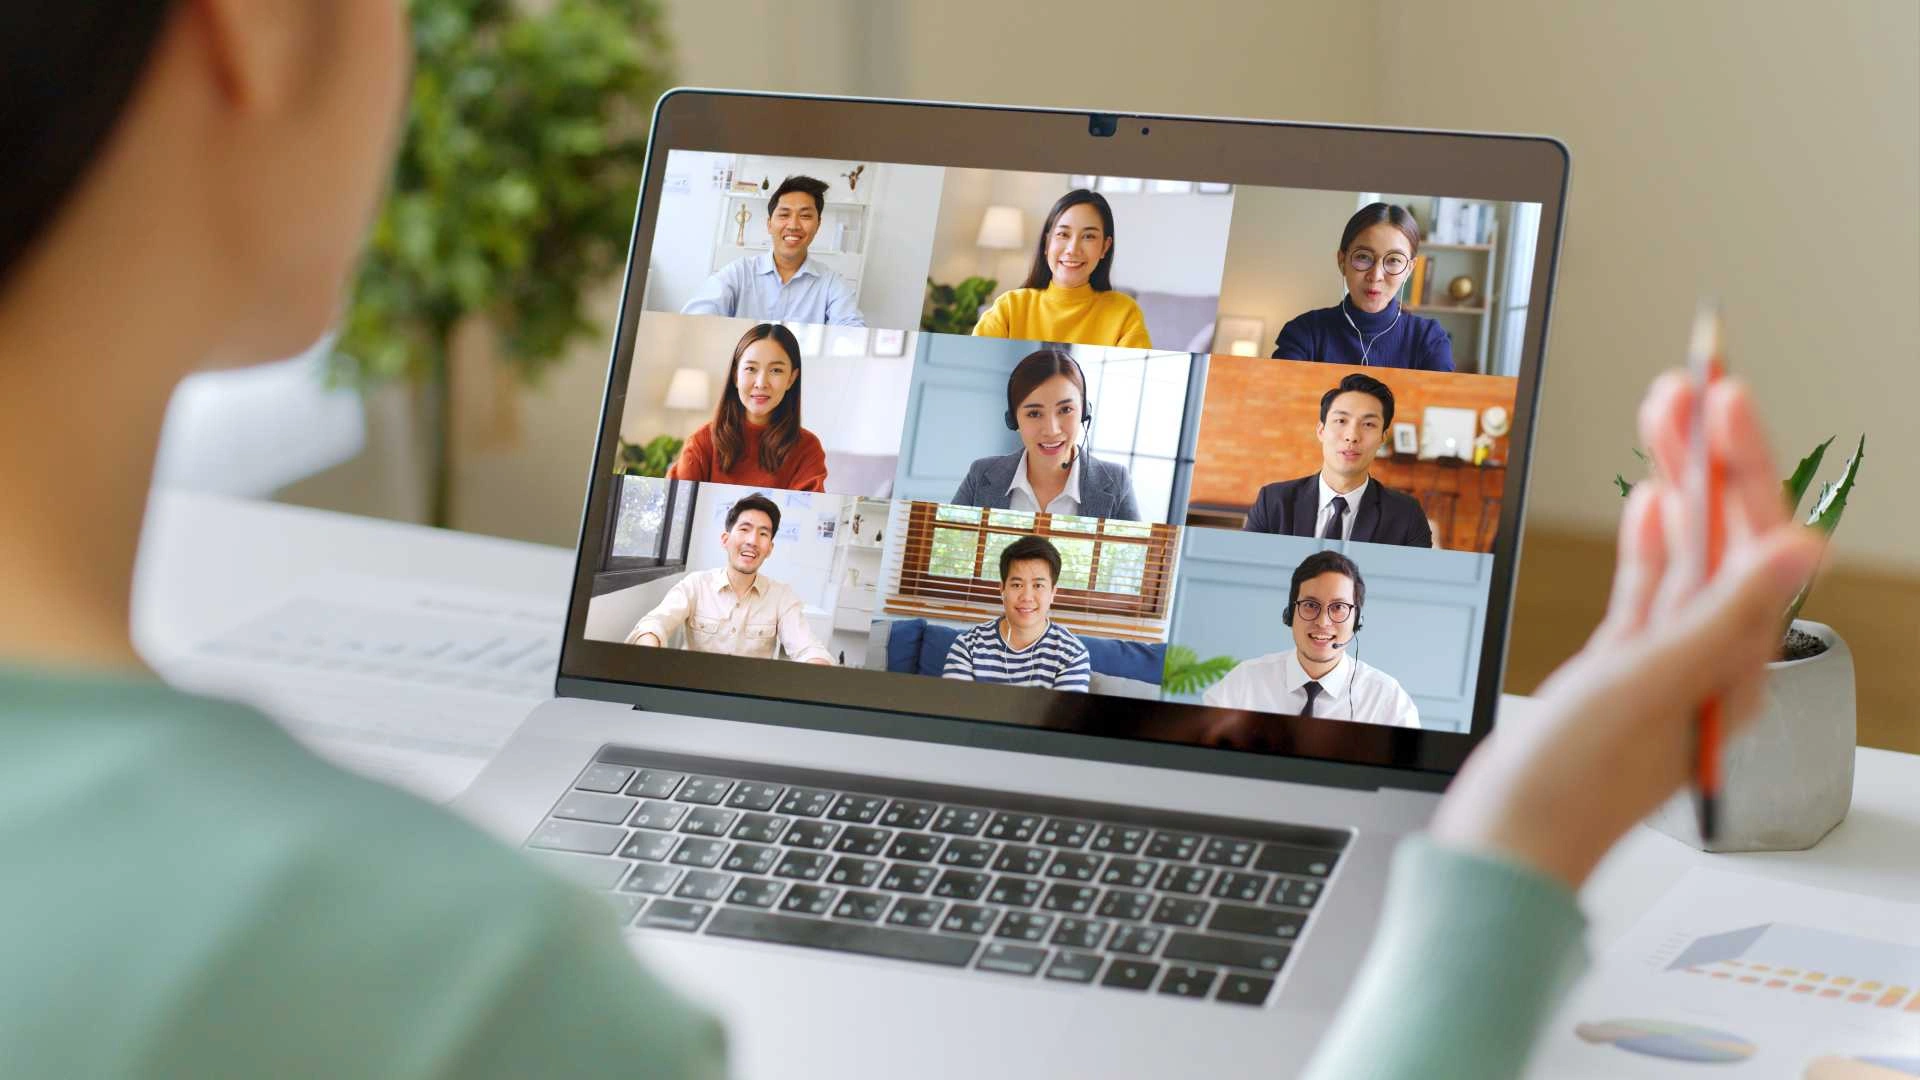 Unlimited Google Meet video calls for all until March 2021 featured image